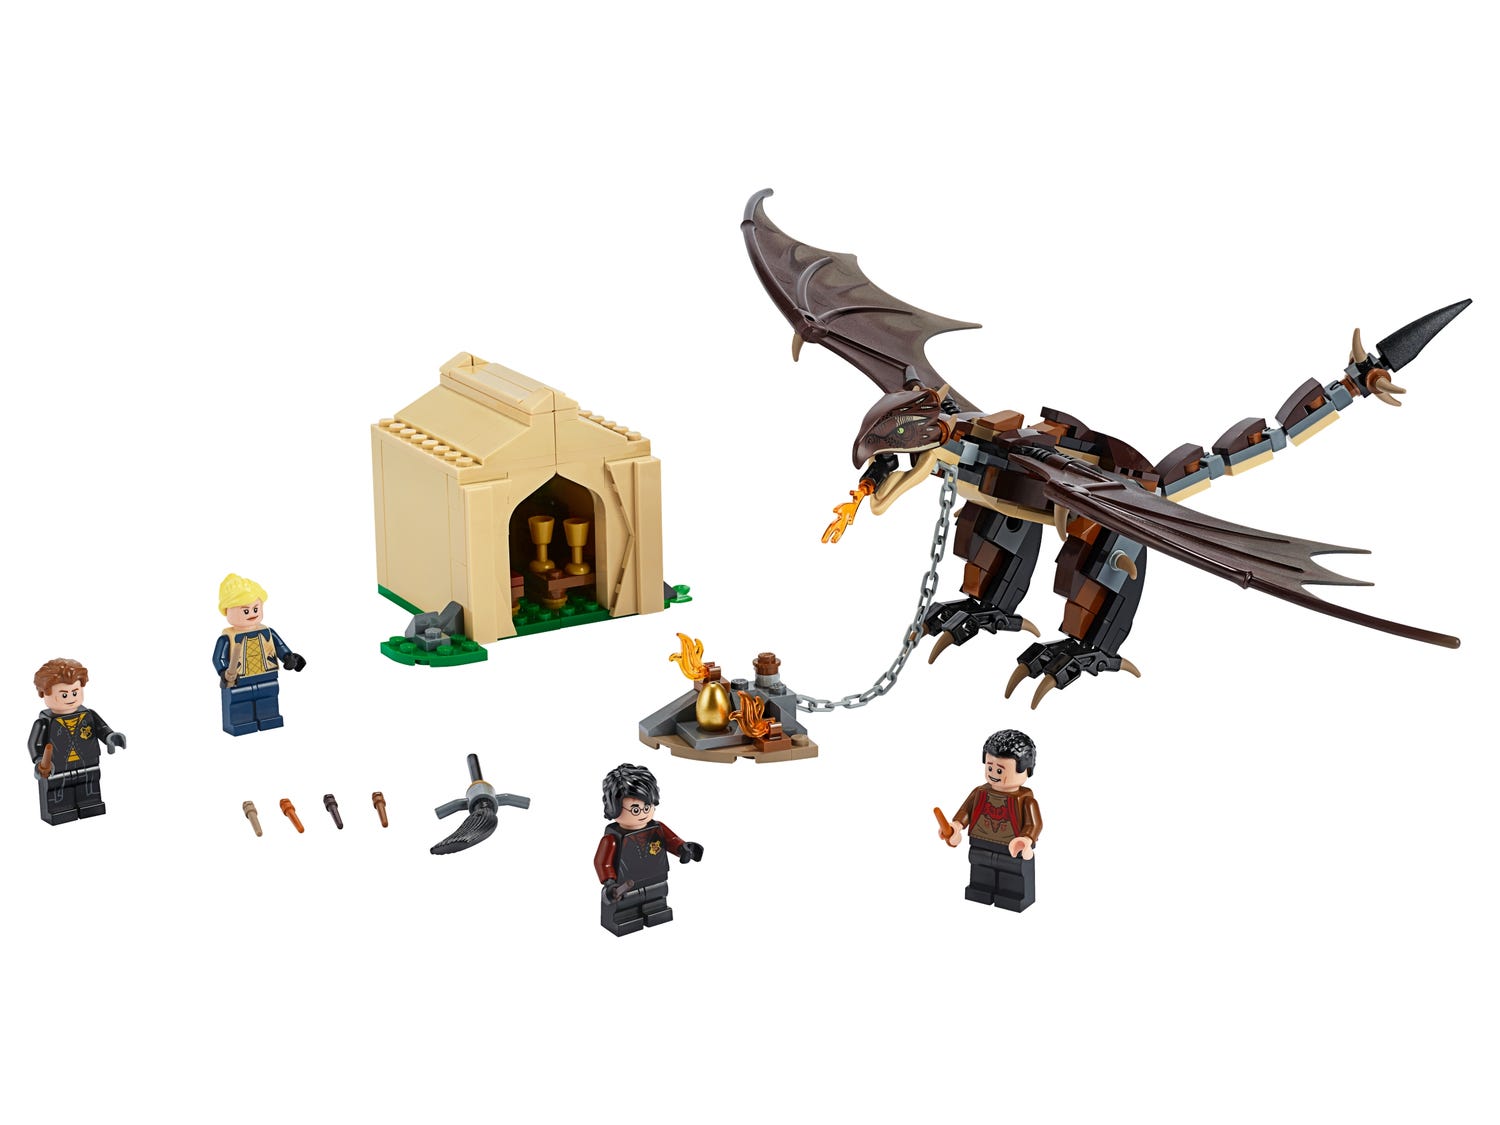 Hacia arriba director carta Hungarian Horntail Triwizard Challenge 75946 | Harry Potter™ | Buy online  at the Official LEGO® Shop US